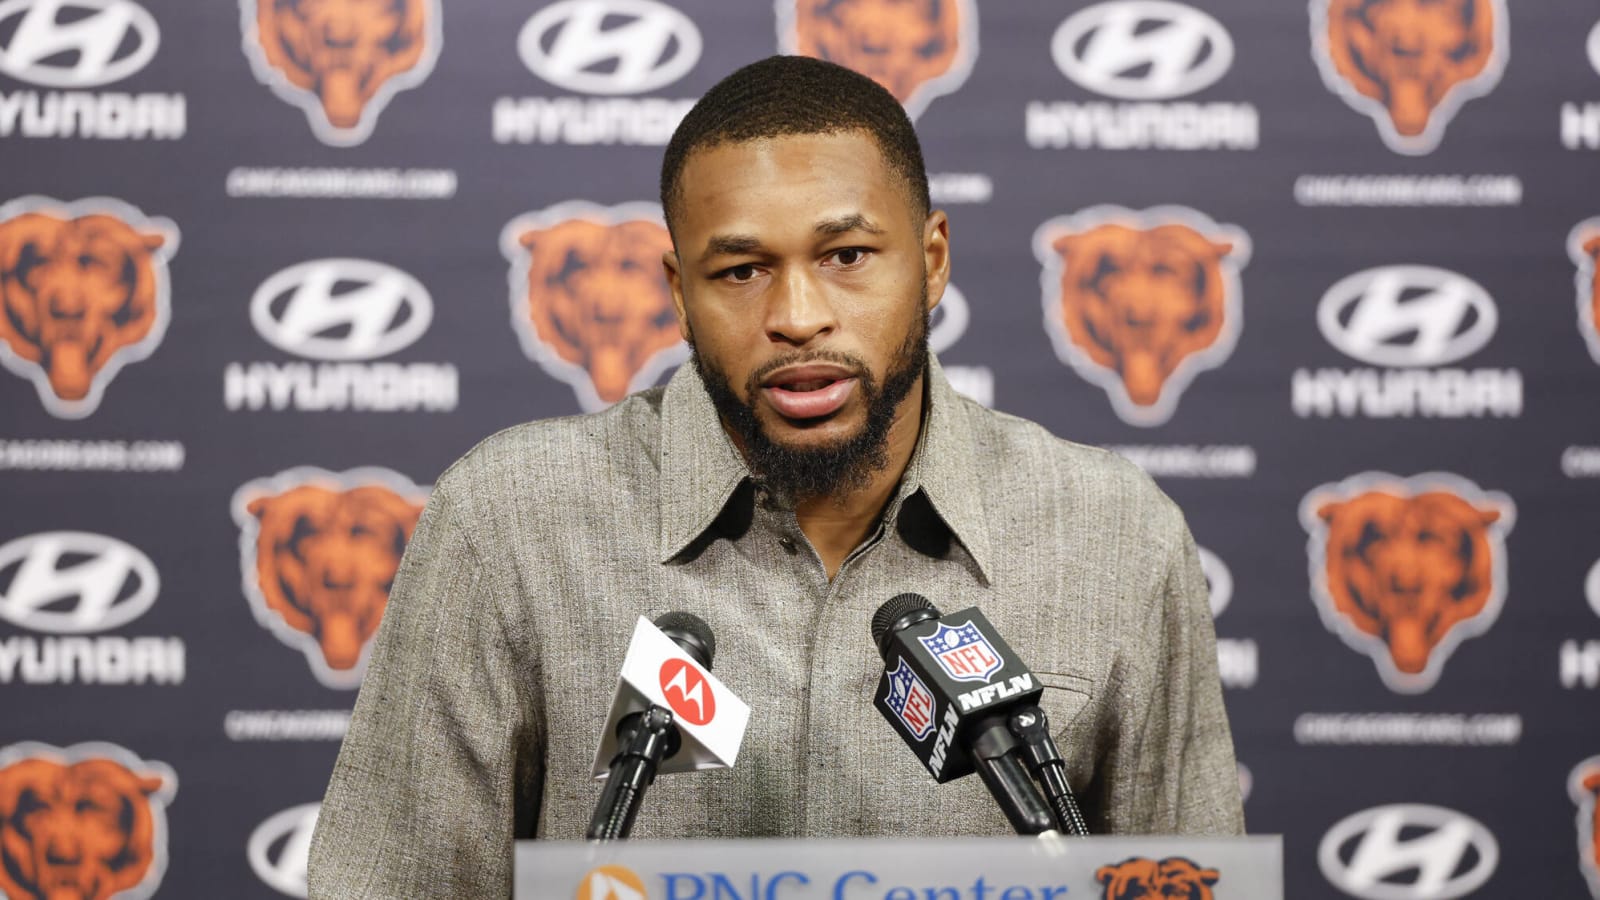 Chicago Bears' free-agent signing labeled one of NFL's worst